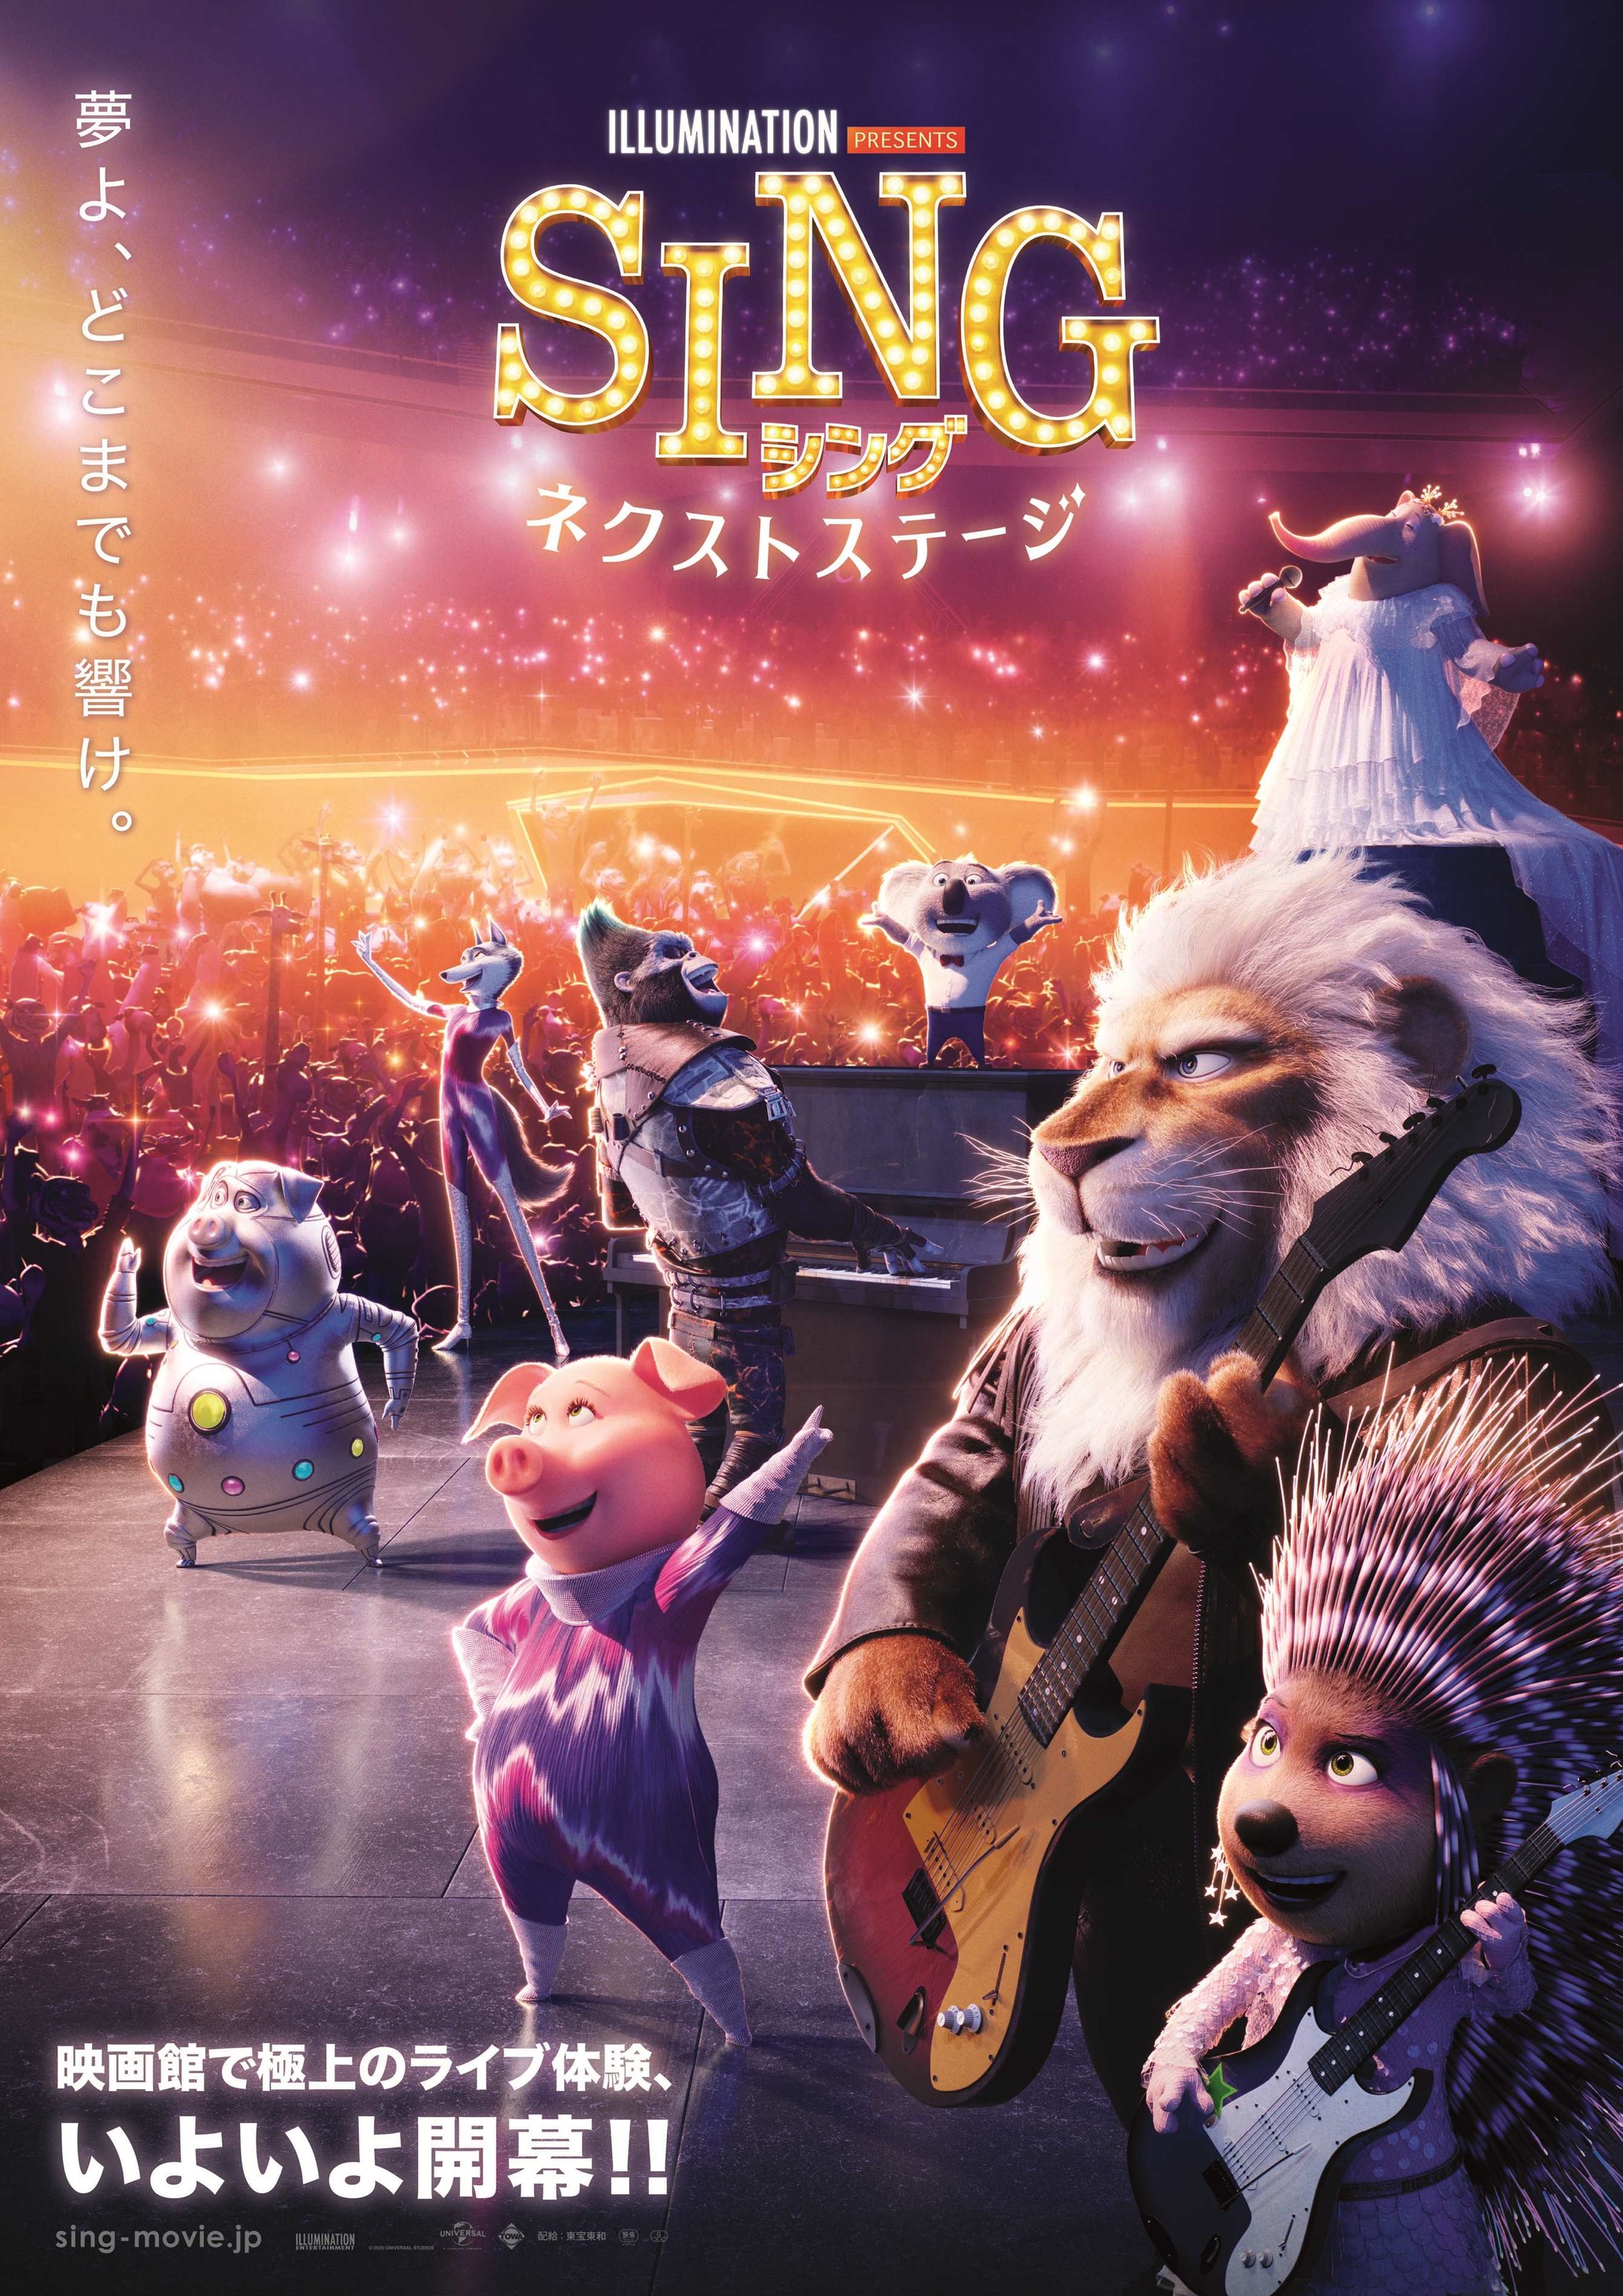 Mega Sized Movie Poster Image for Sing 2 (#38 of 38)